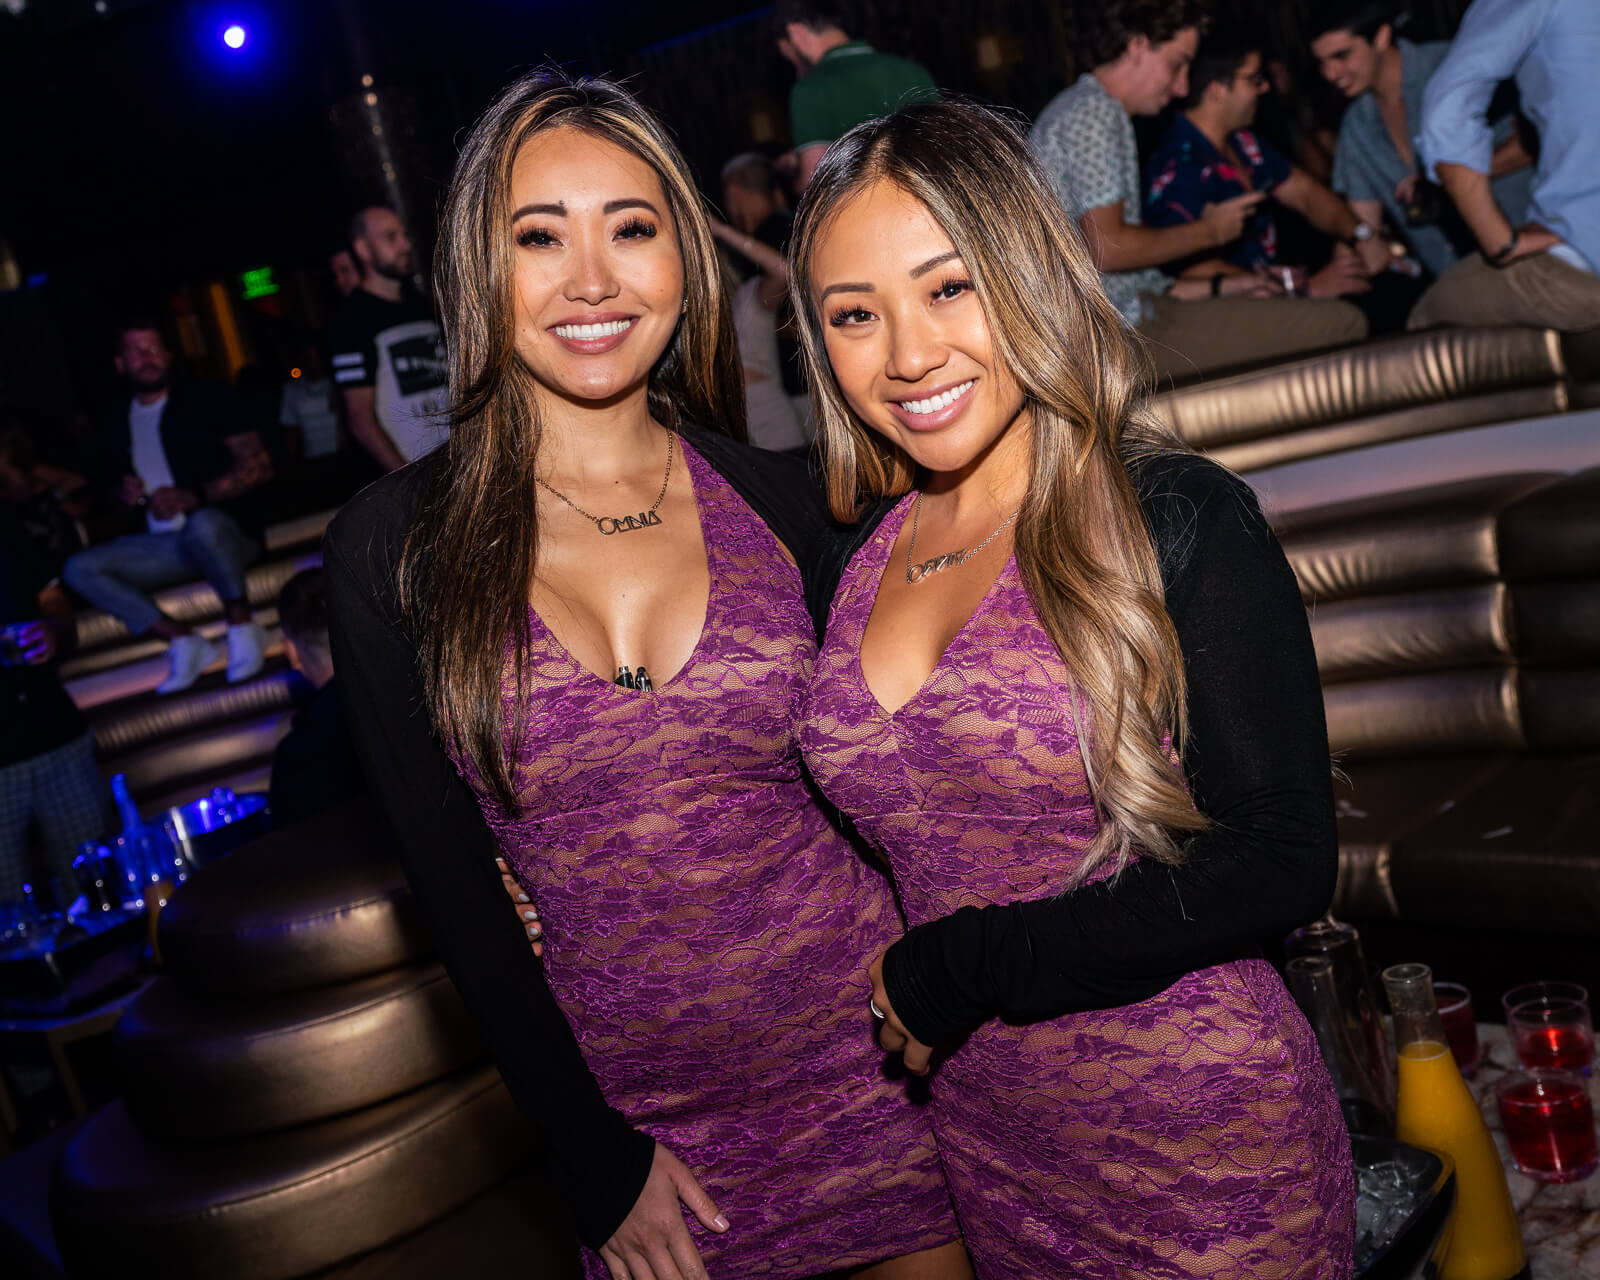 Cocktail Waitresses at OMNIA